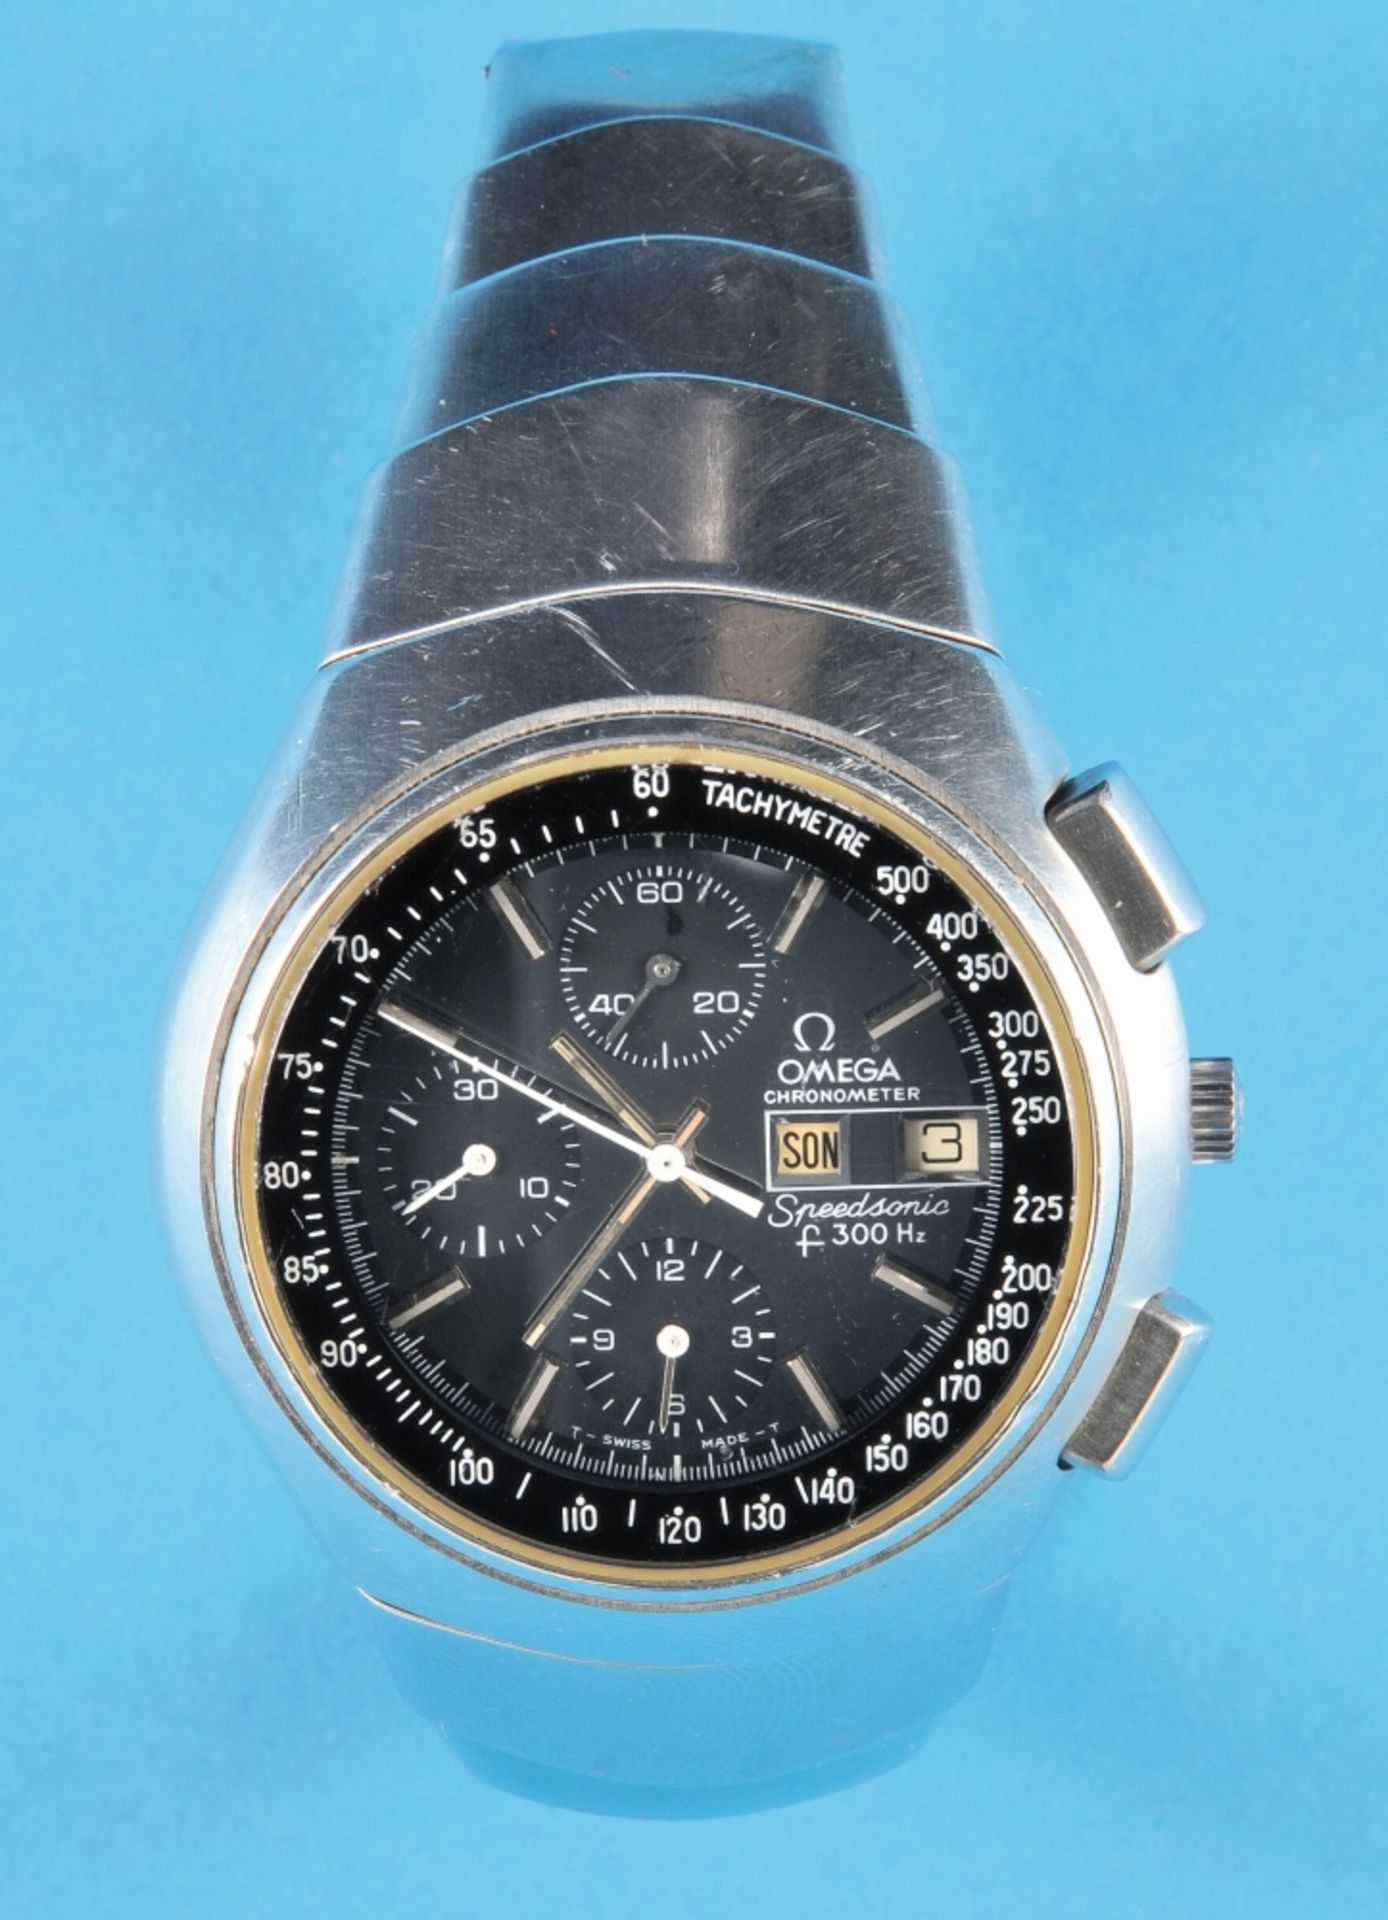 Omega Speedsonic f300 Electronic Chronograph Chronometer Wristwatch with day of the week and date,